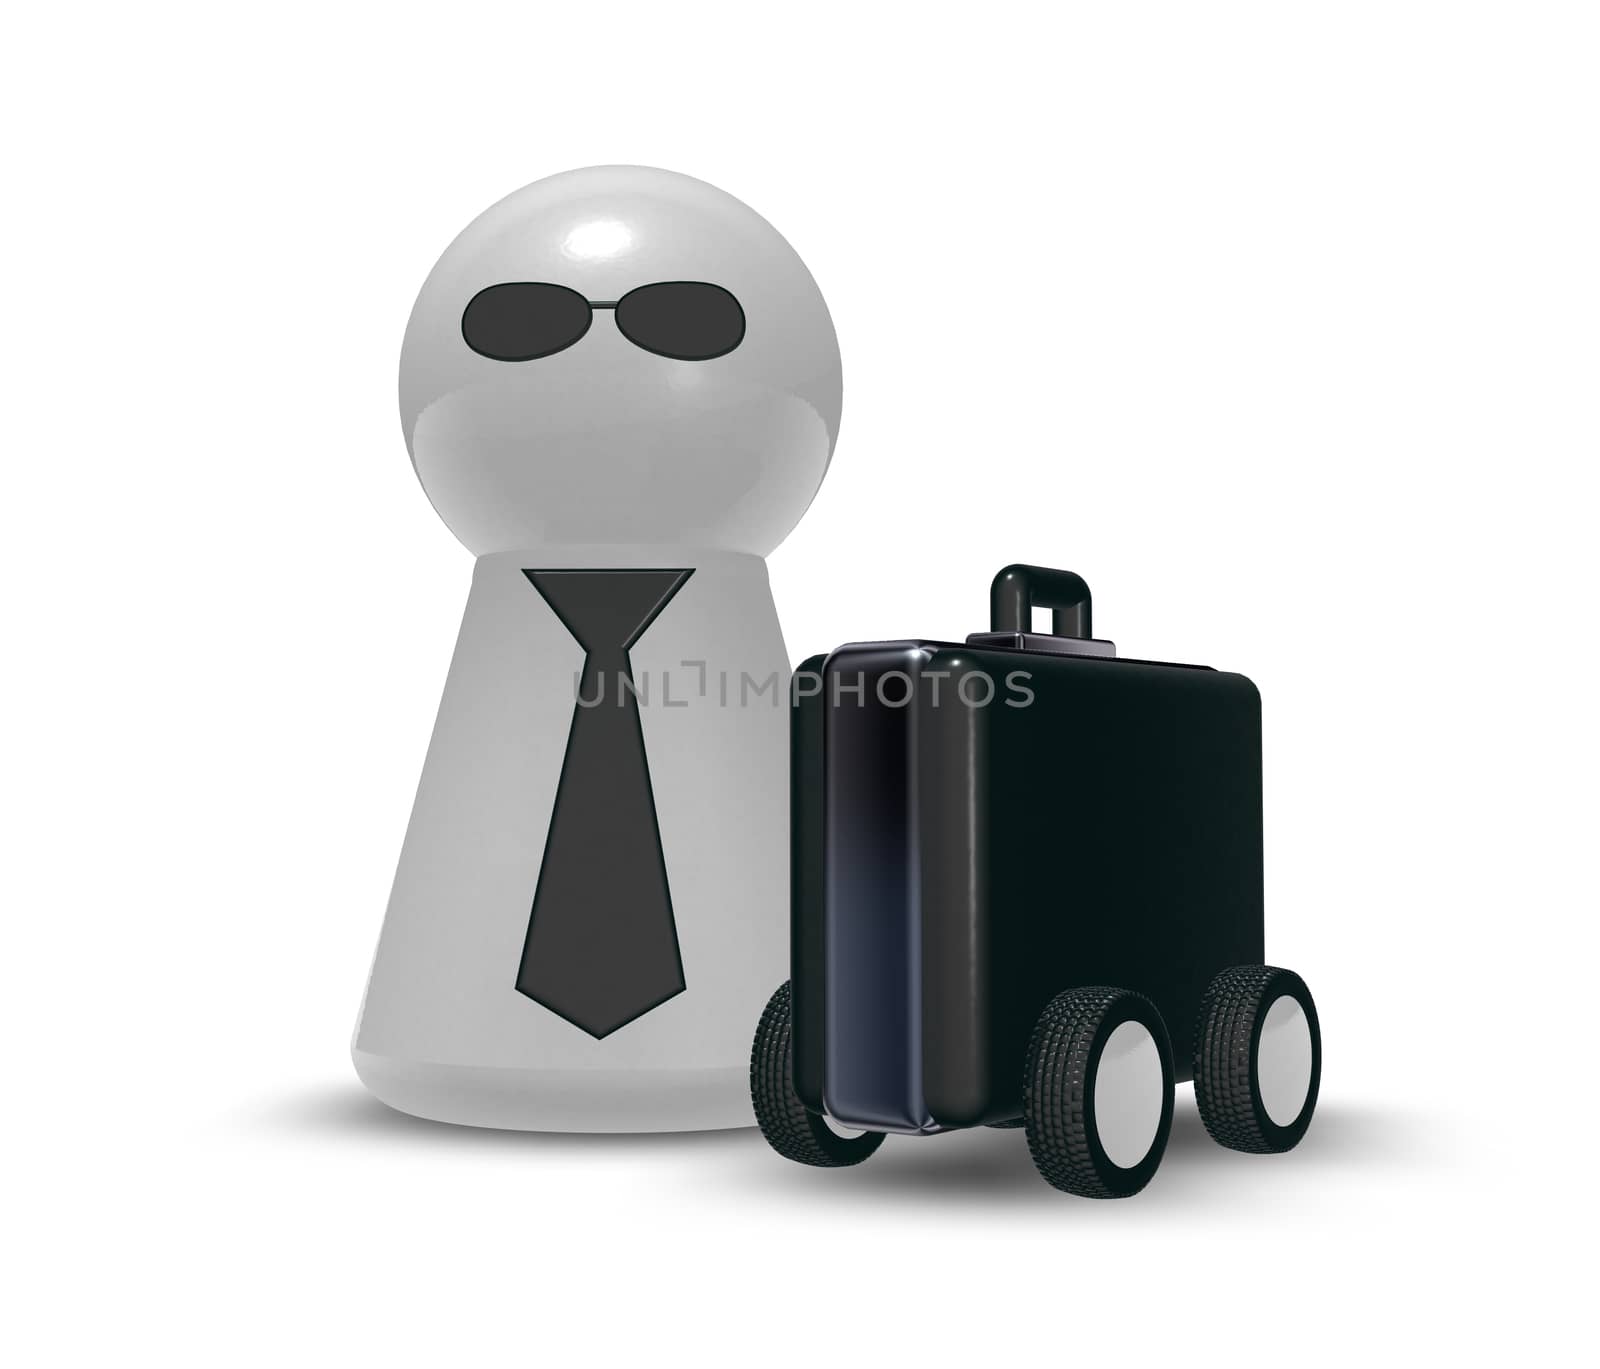 case on wheels and play figure with tie - 3d illustration